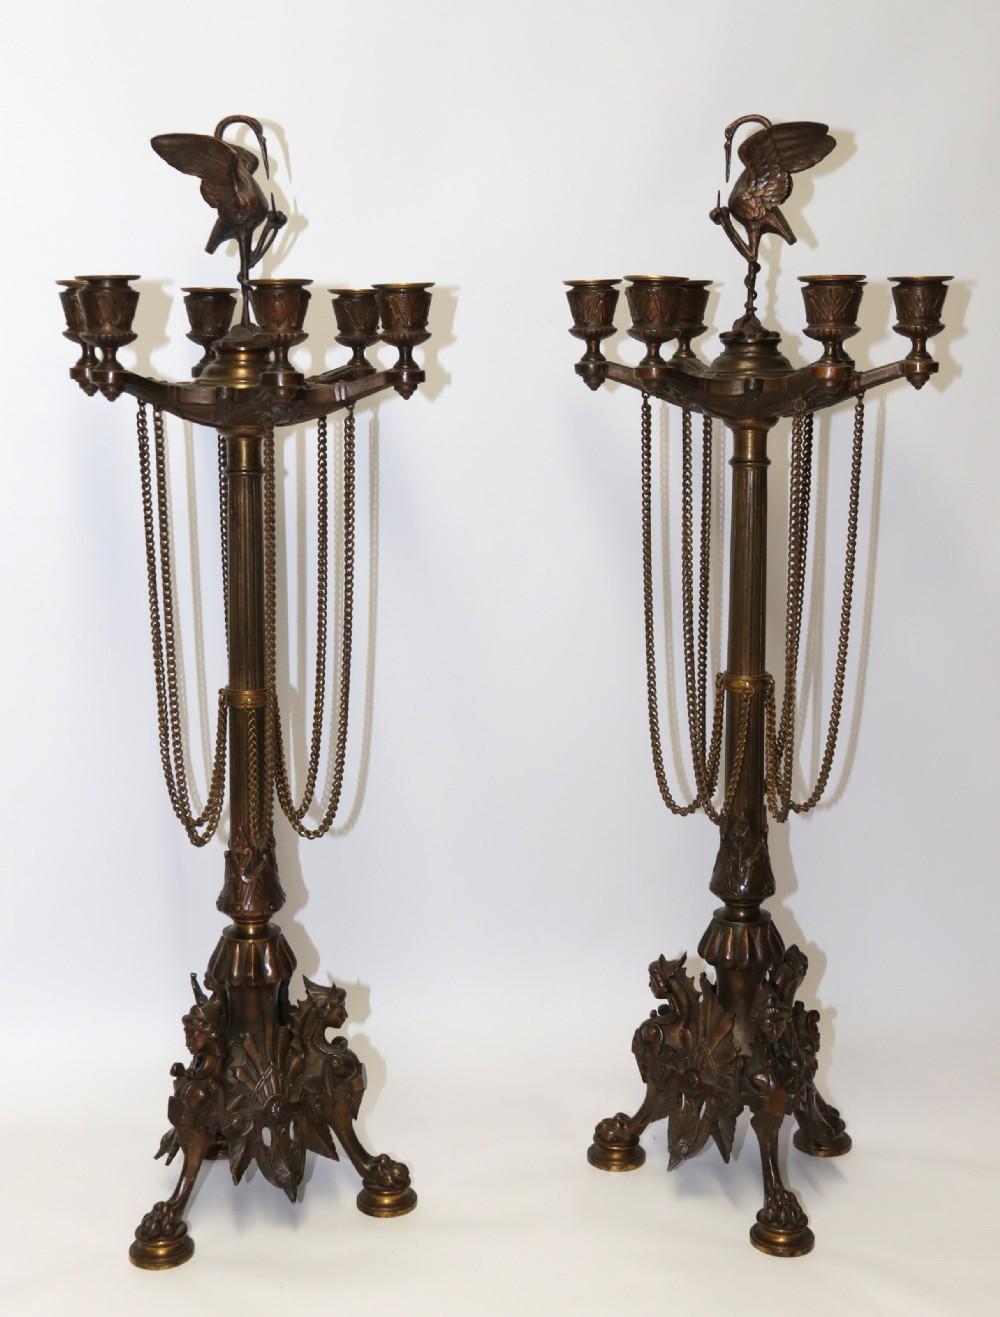 This large pair of cast bronze six branch candelabra were made in France circa 1860 in a Gothic style, cast with great detail and are in very good condition retaining their original bronze hanging chains which are often missing. This pair of